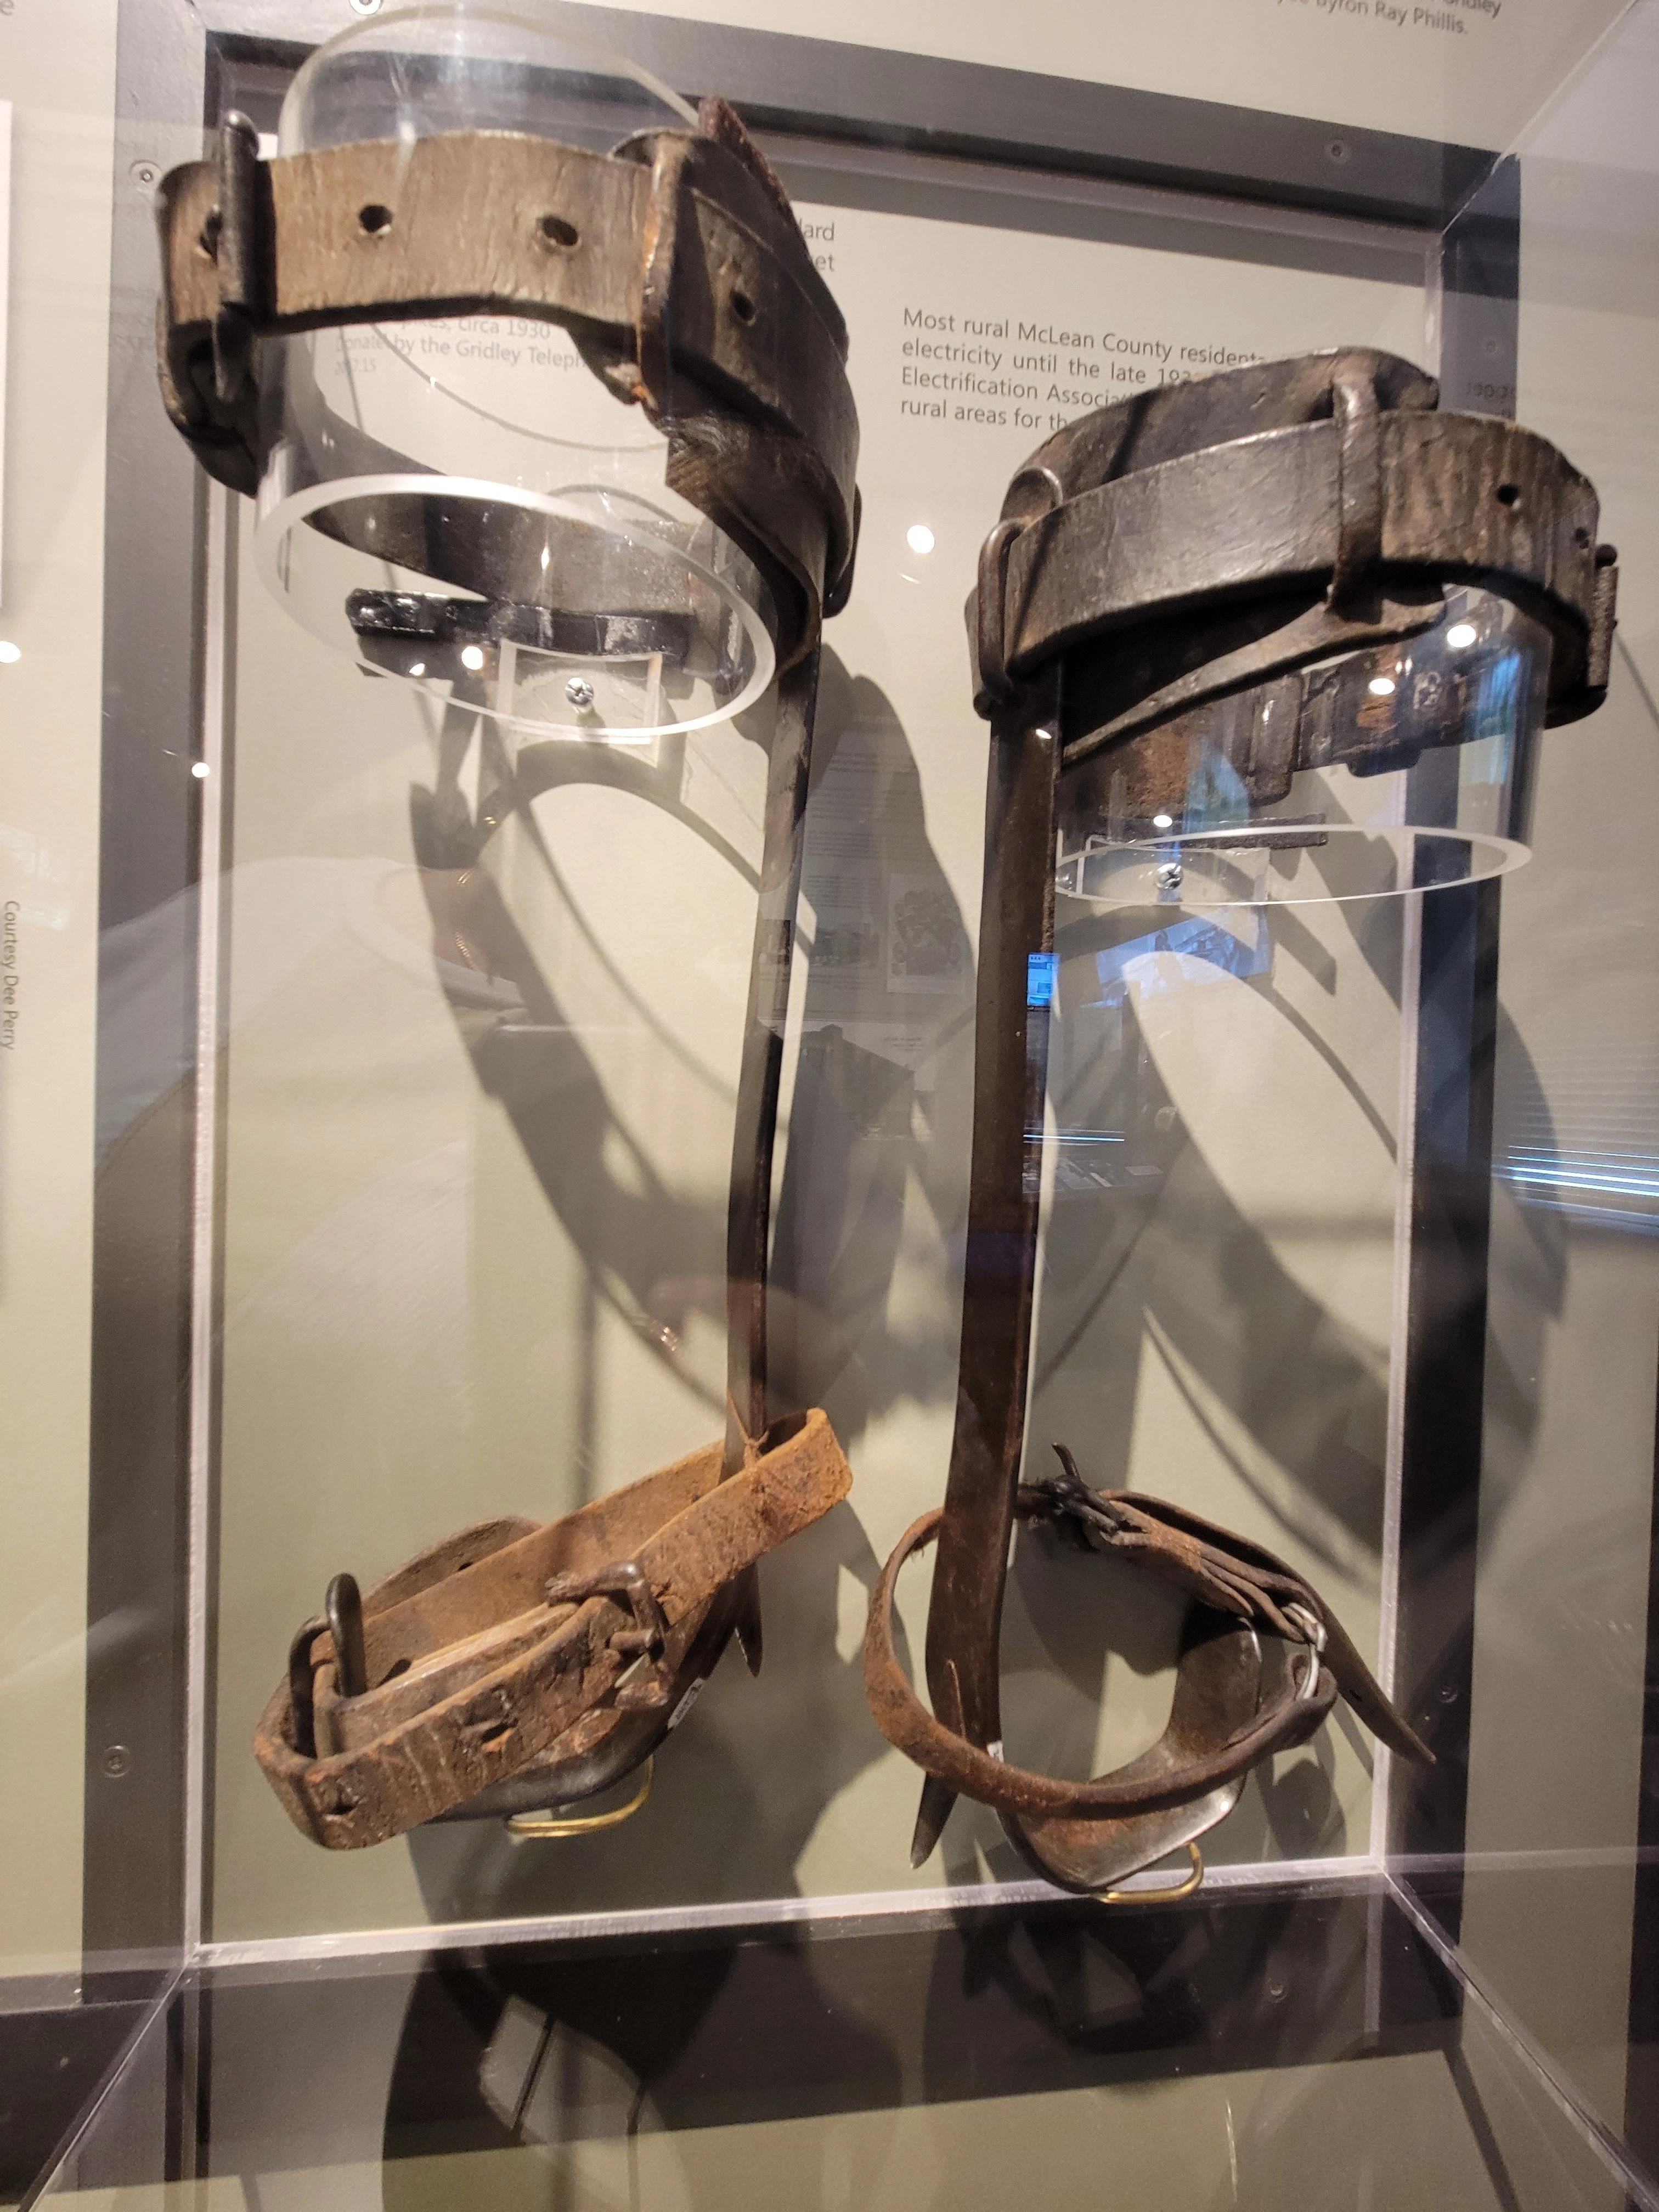 Adjustable leather straps that go around the legs and feet. A metal rod goes down the side of the leg and under their boot, with a point that protrudes on the bottom, allowing the worker to securely climb up a pole.